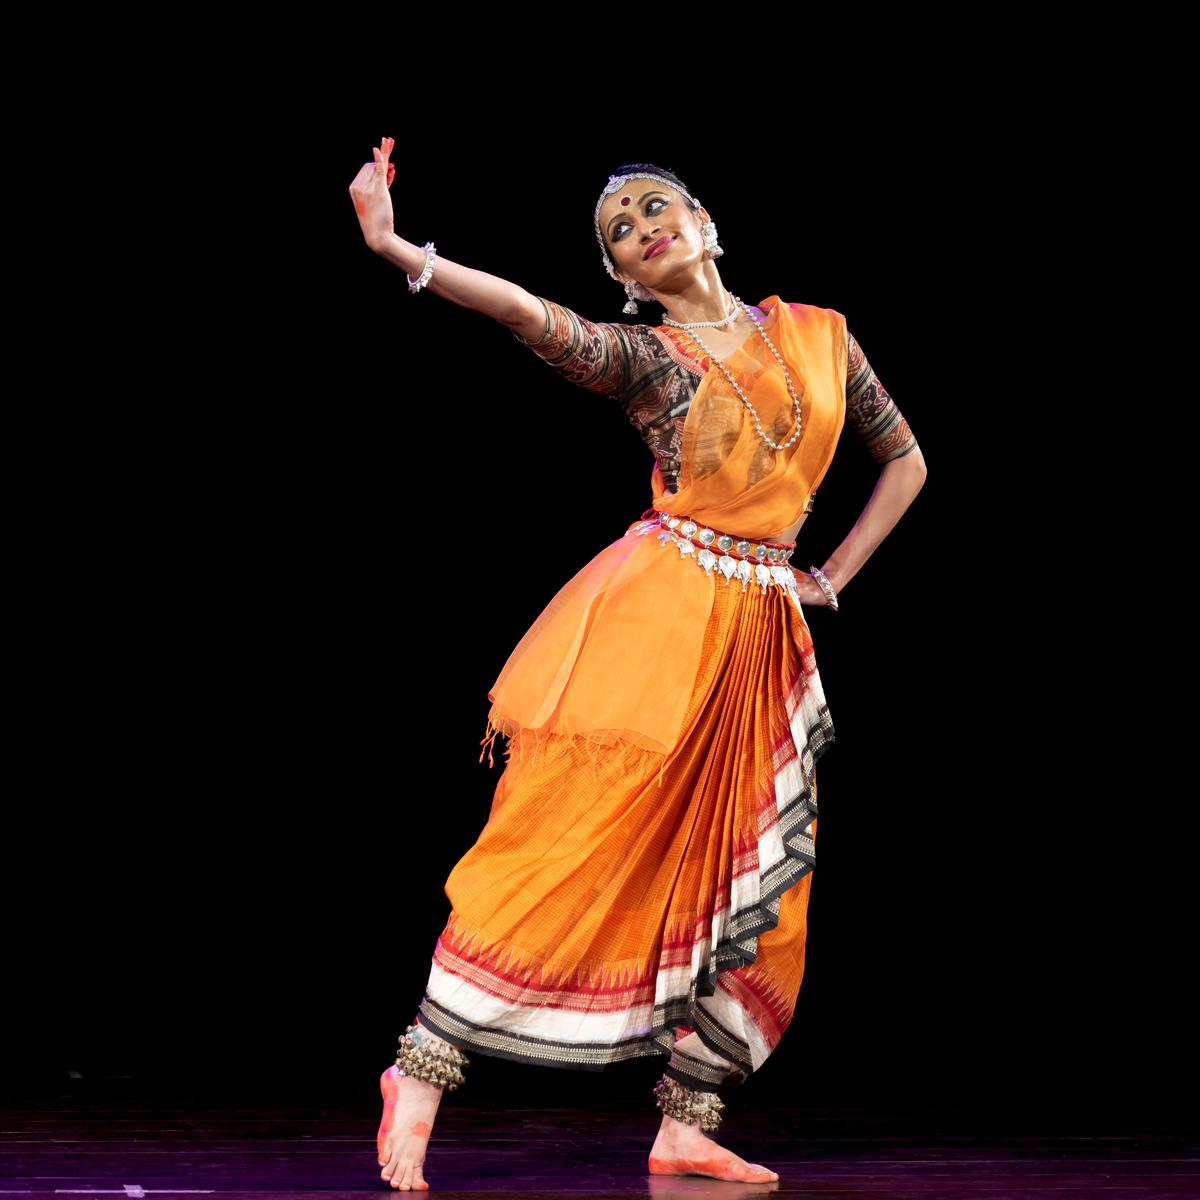 The festival opens with Prithvi Nayak’s Odissi dance recital